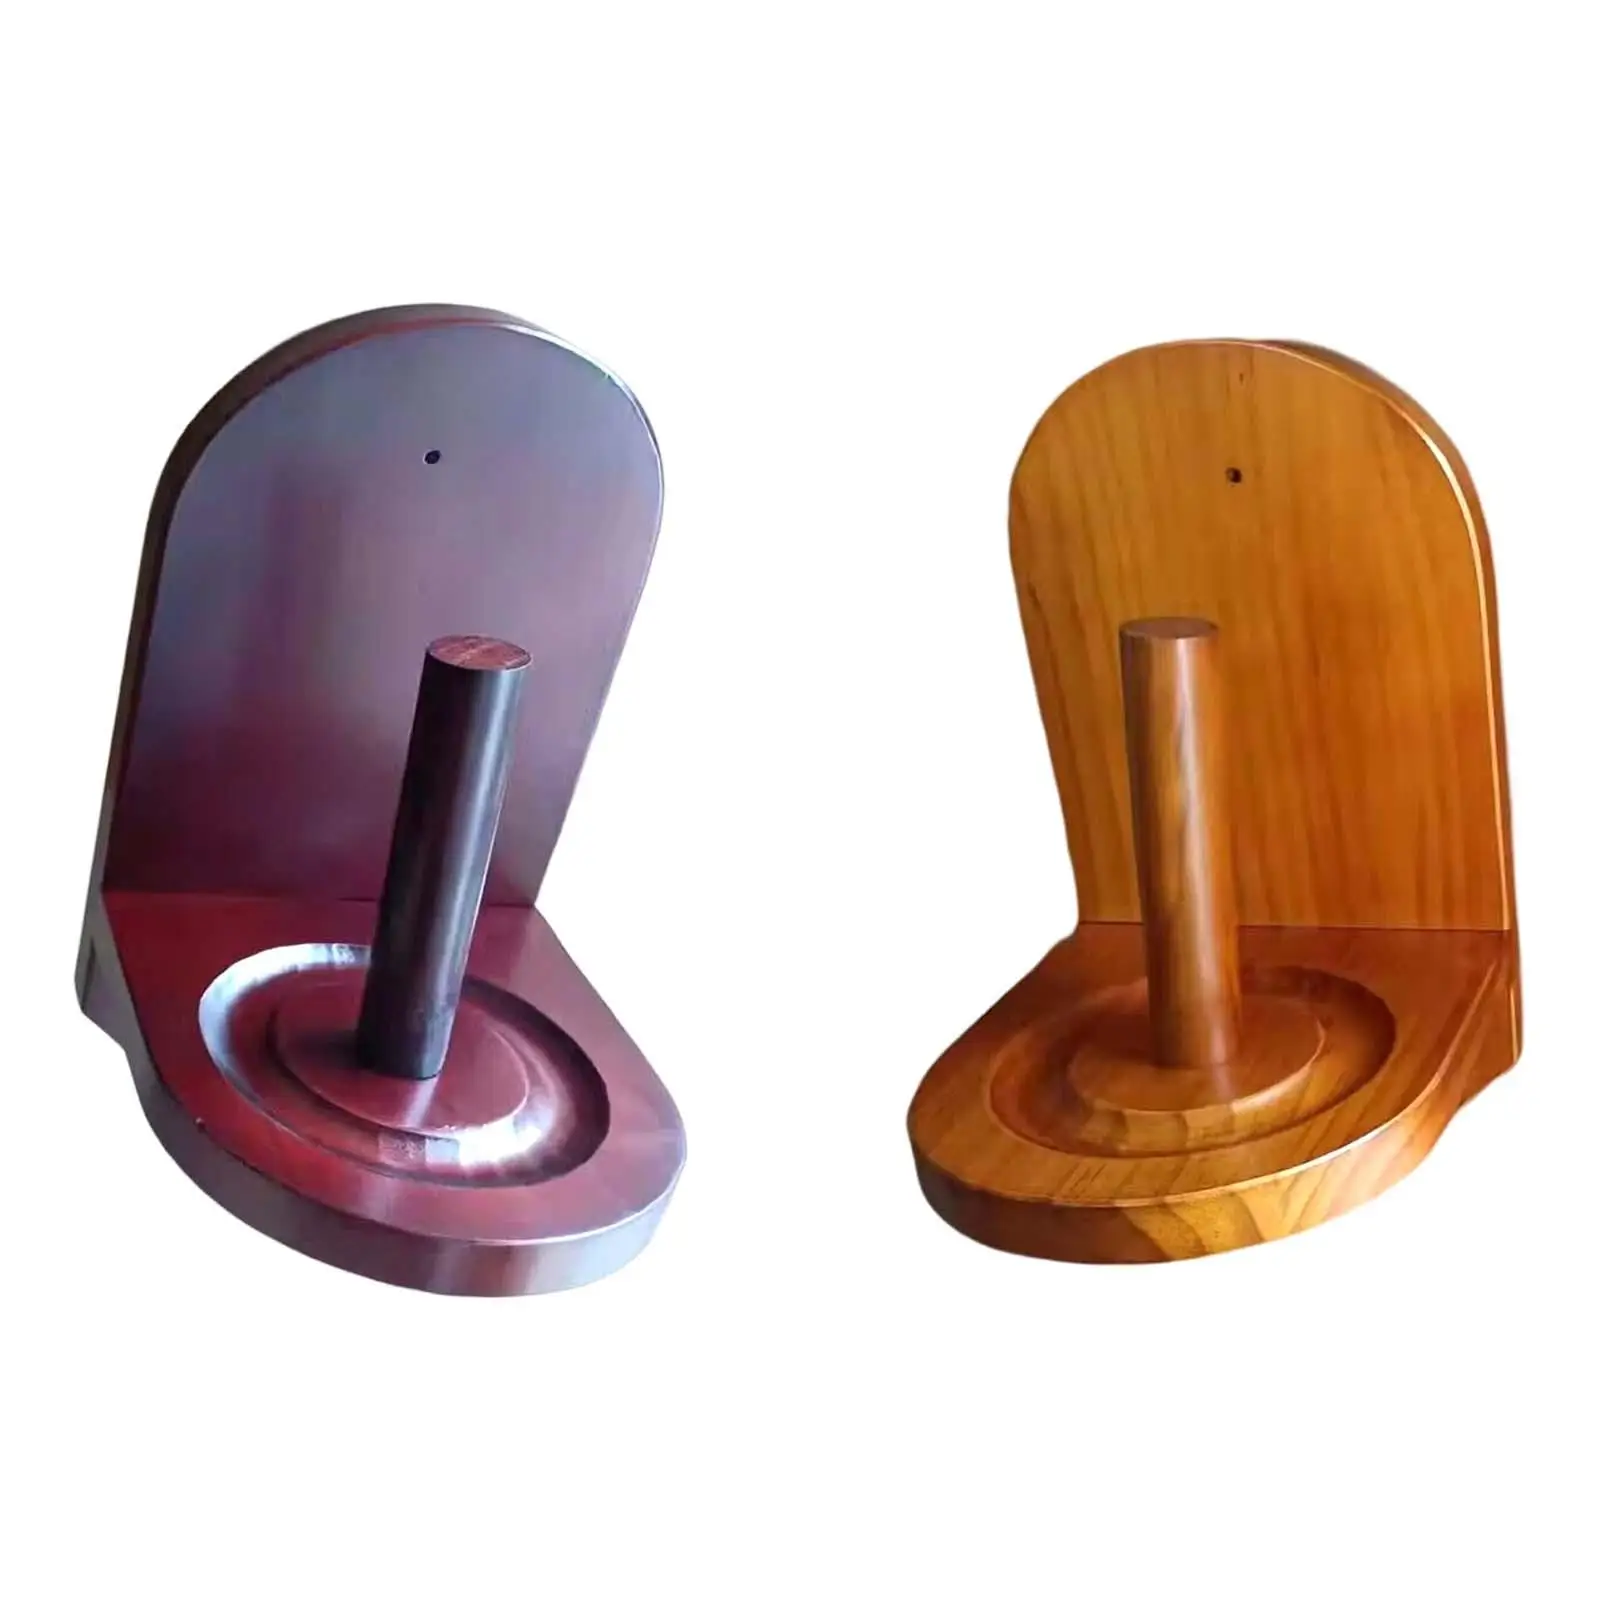 Wooden Cone Chalk Holder Wall Mount Sturdy Hand Chalk Holder for Billiards Pool Table Accessories